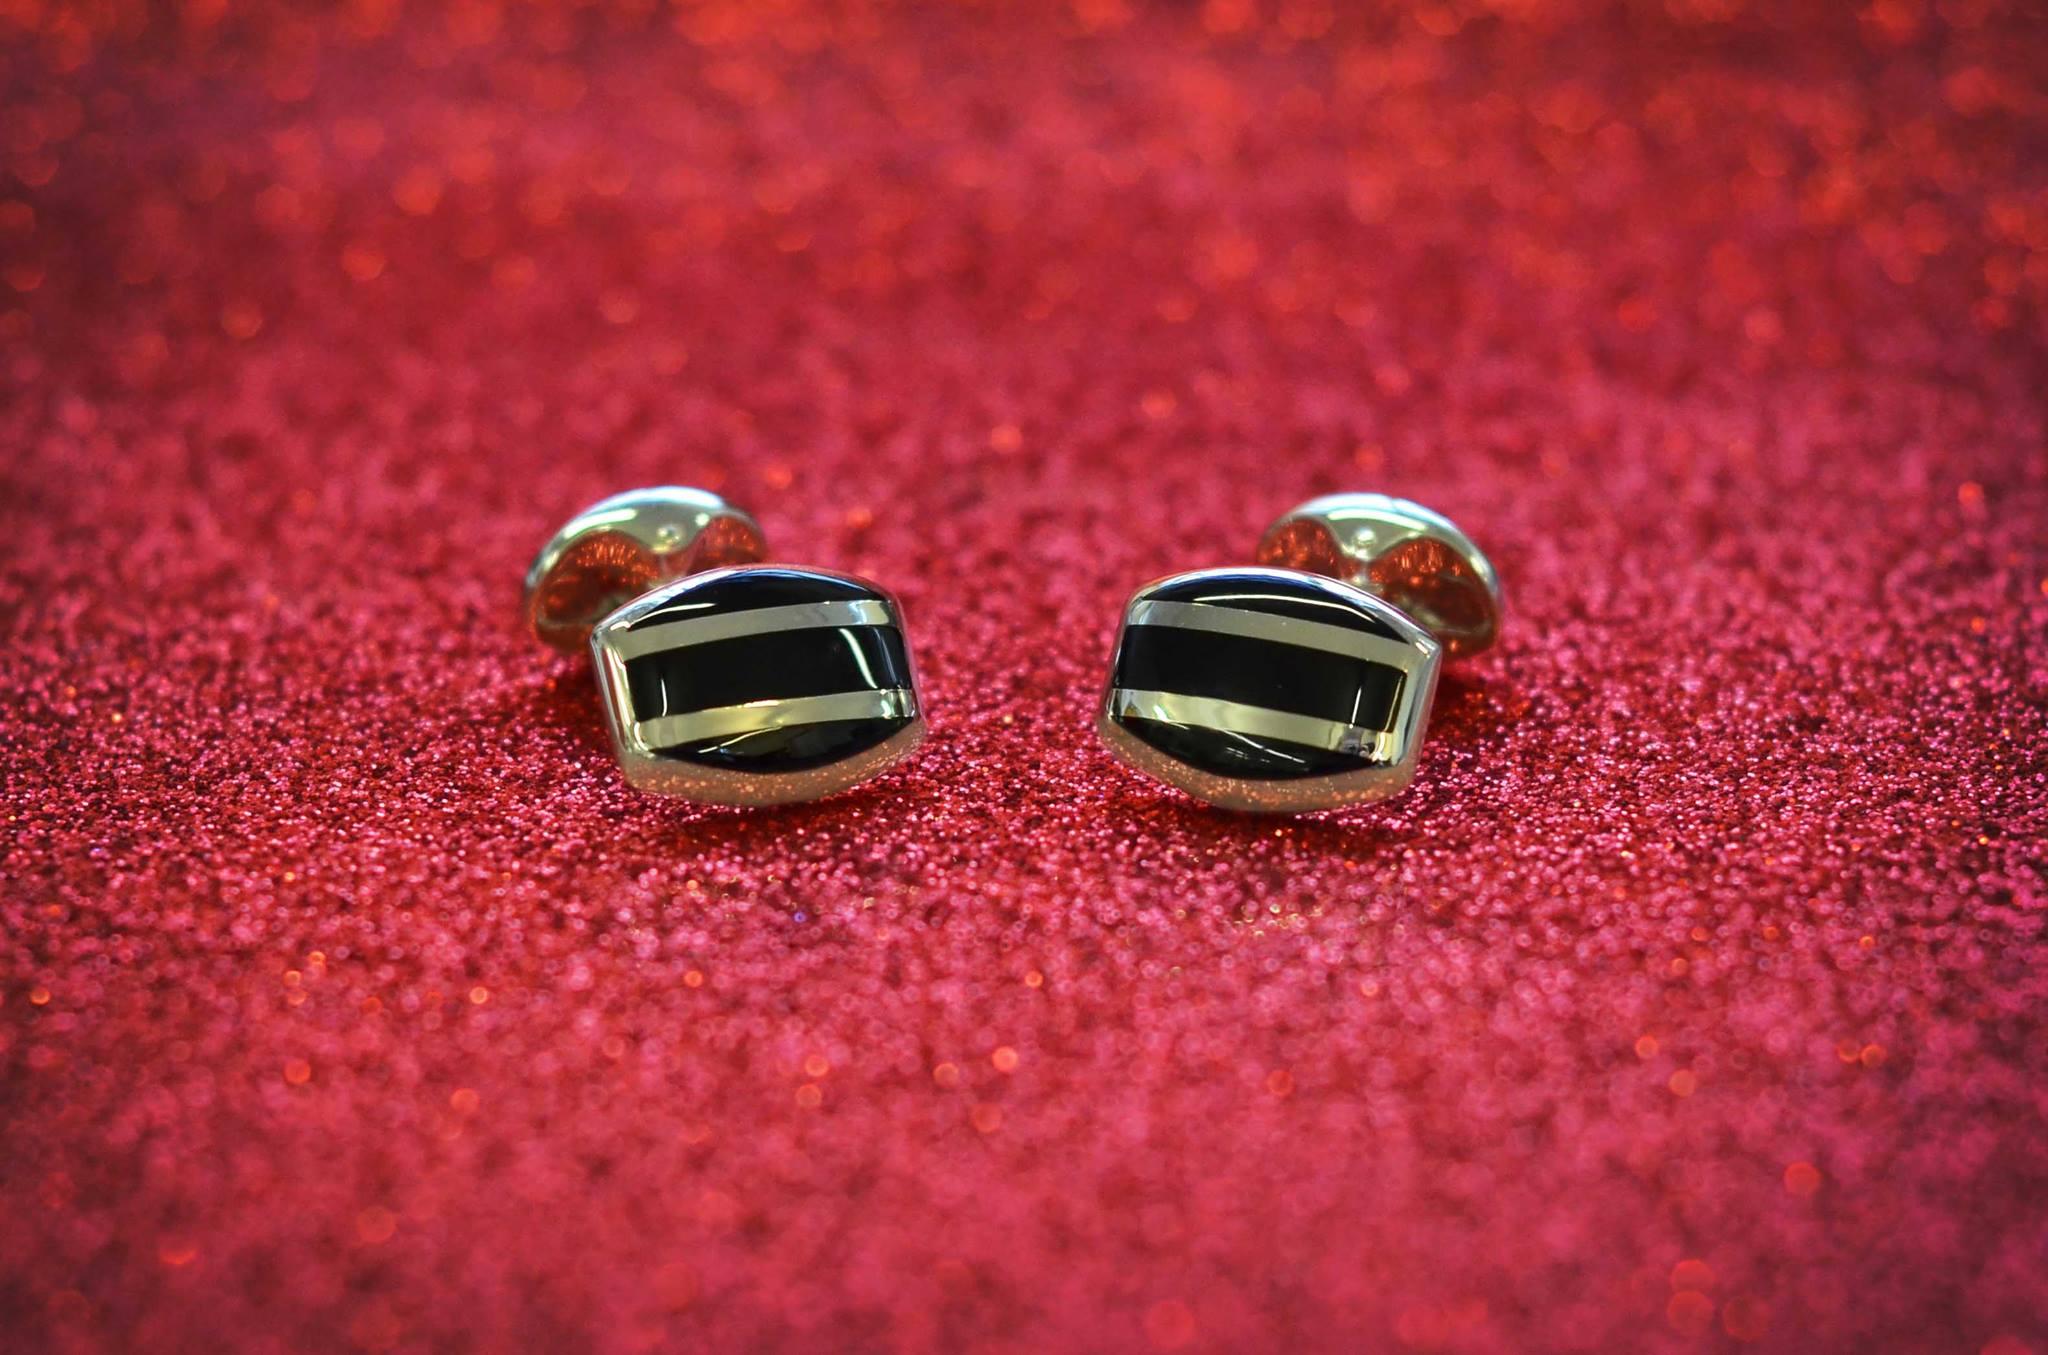 DEAKIN & FRANCIS, Piccadilly Arcade, London

These sterling silver barrel shaped cufflinks have a small domed oval spring link fitting, and an elegant, black striped onyx inlay. They are prefect for all occasions and make a wonderful gift for a